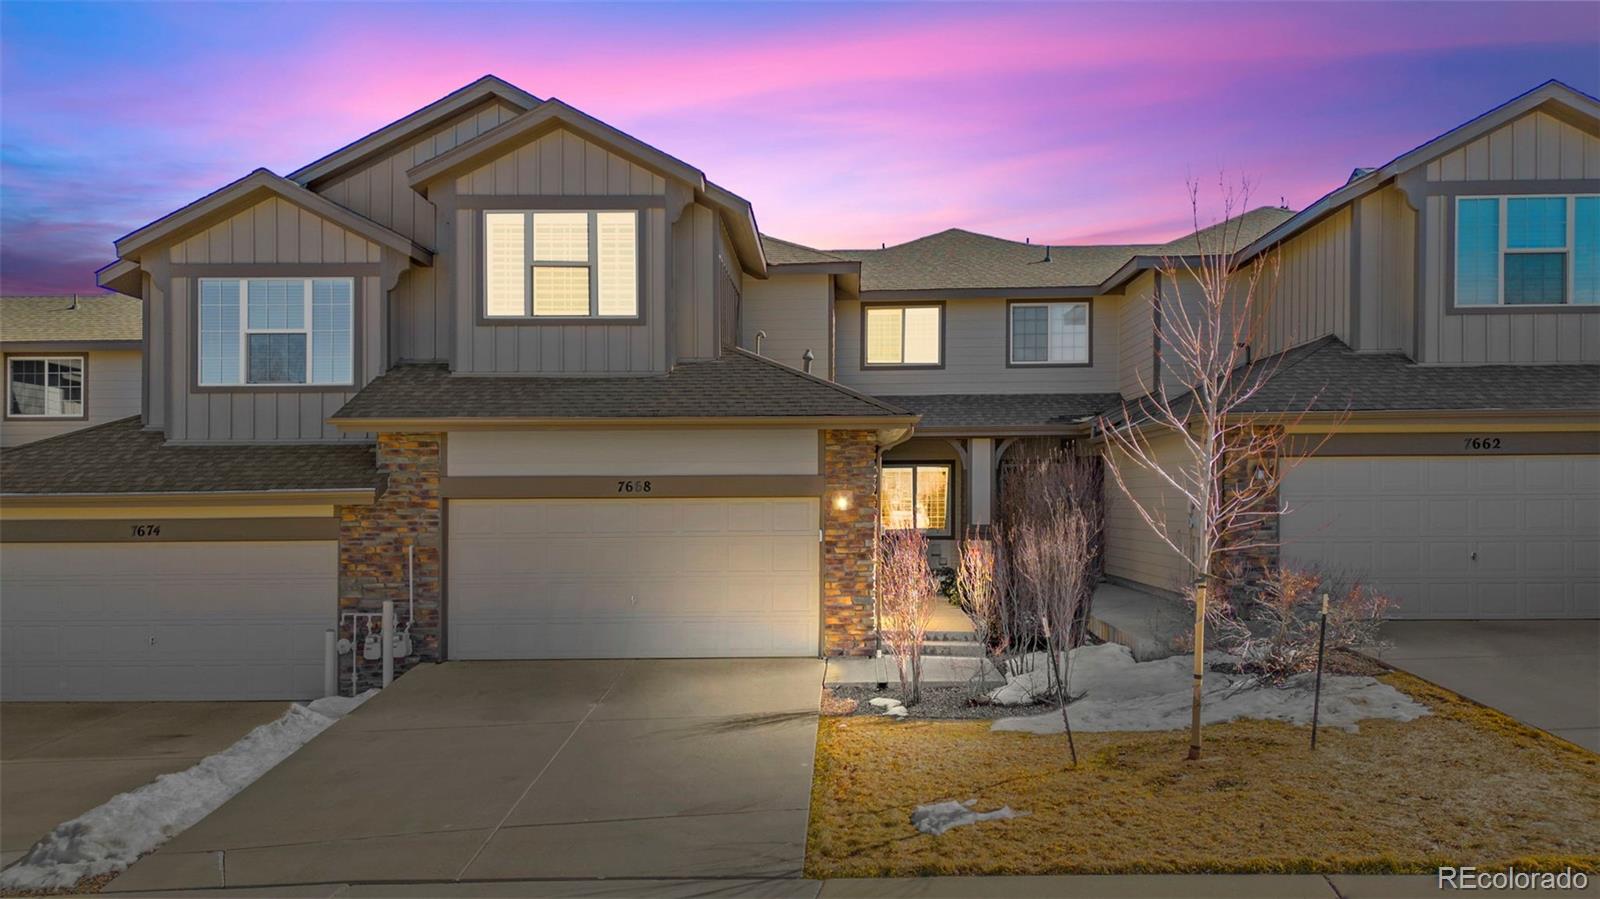 7668  Bristolwood Drive, castle pines MLS: 5842472 Beds: 3 Baths: 4 Price: $620,000